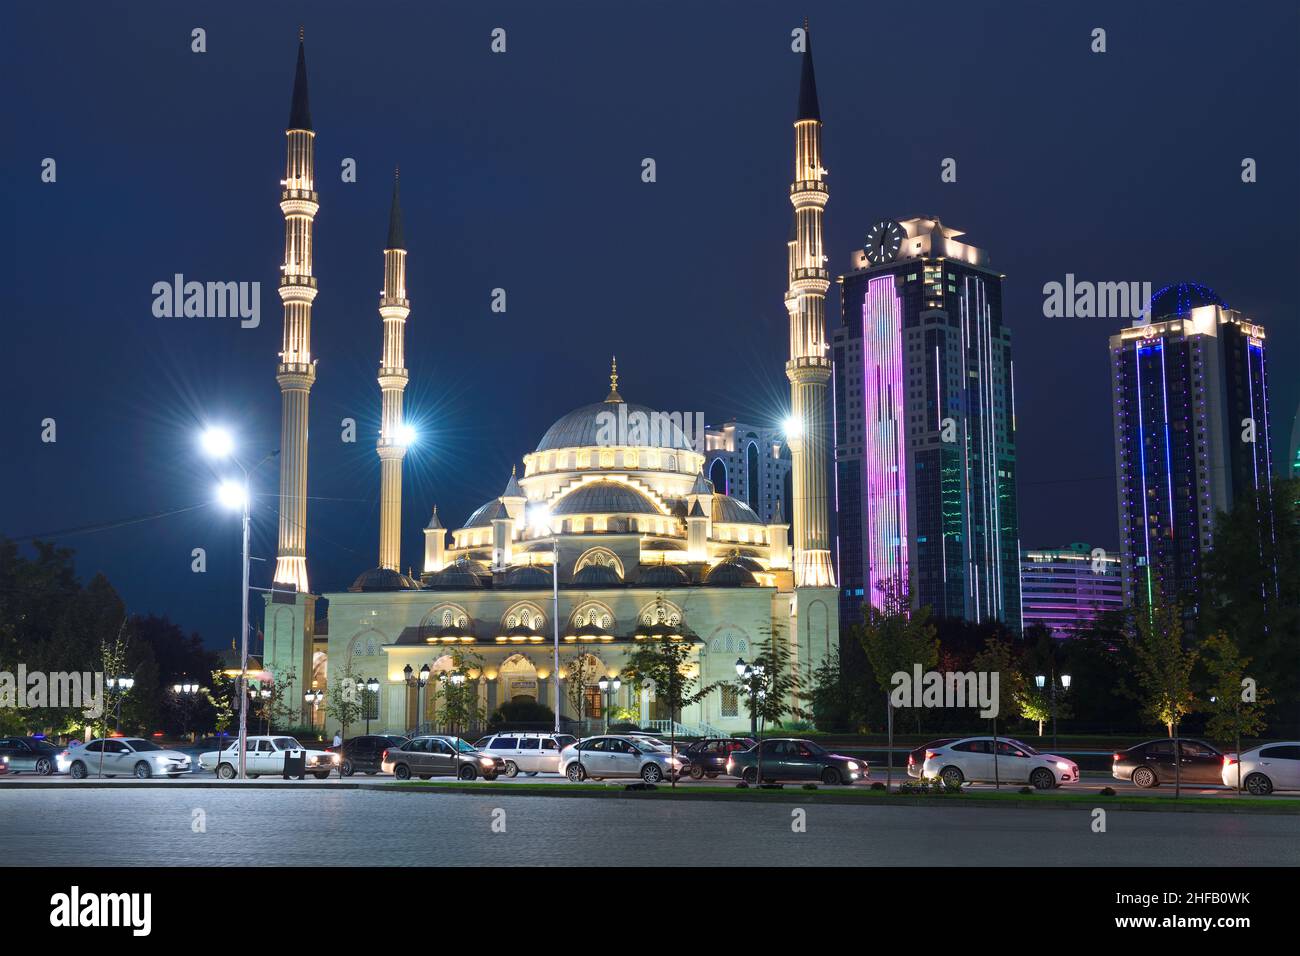 GROZNY, RUSSIA - SEPTEMBER 29, 2021: Mosque 'Heart of Chechnya' in the night cityscape. Chechen Republic Stock Photo